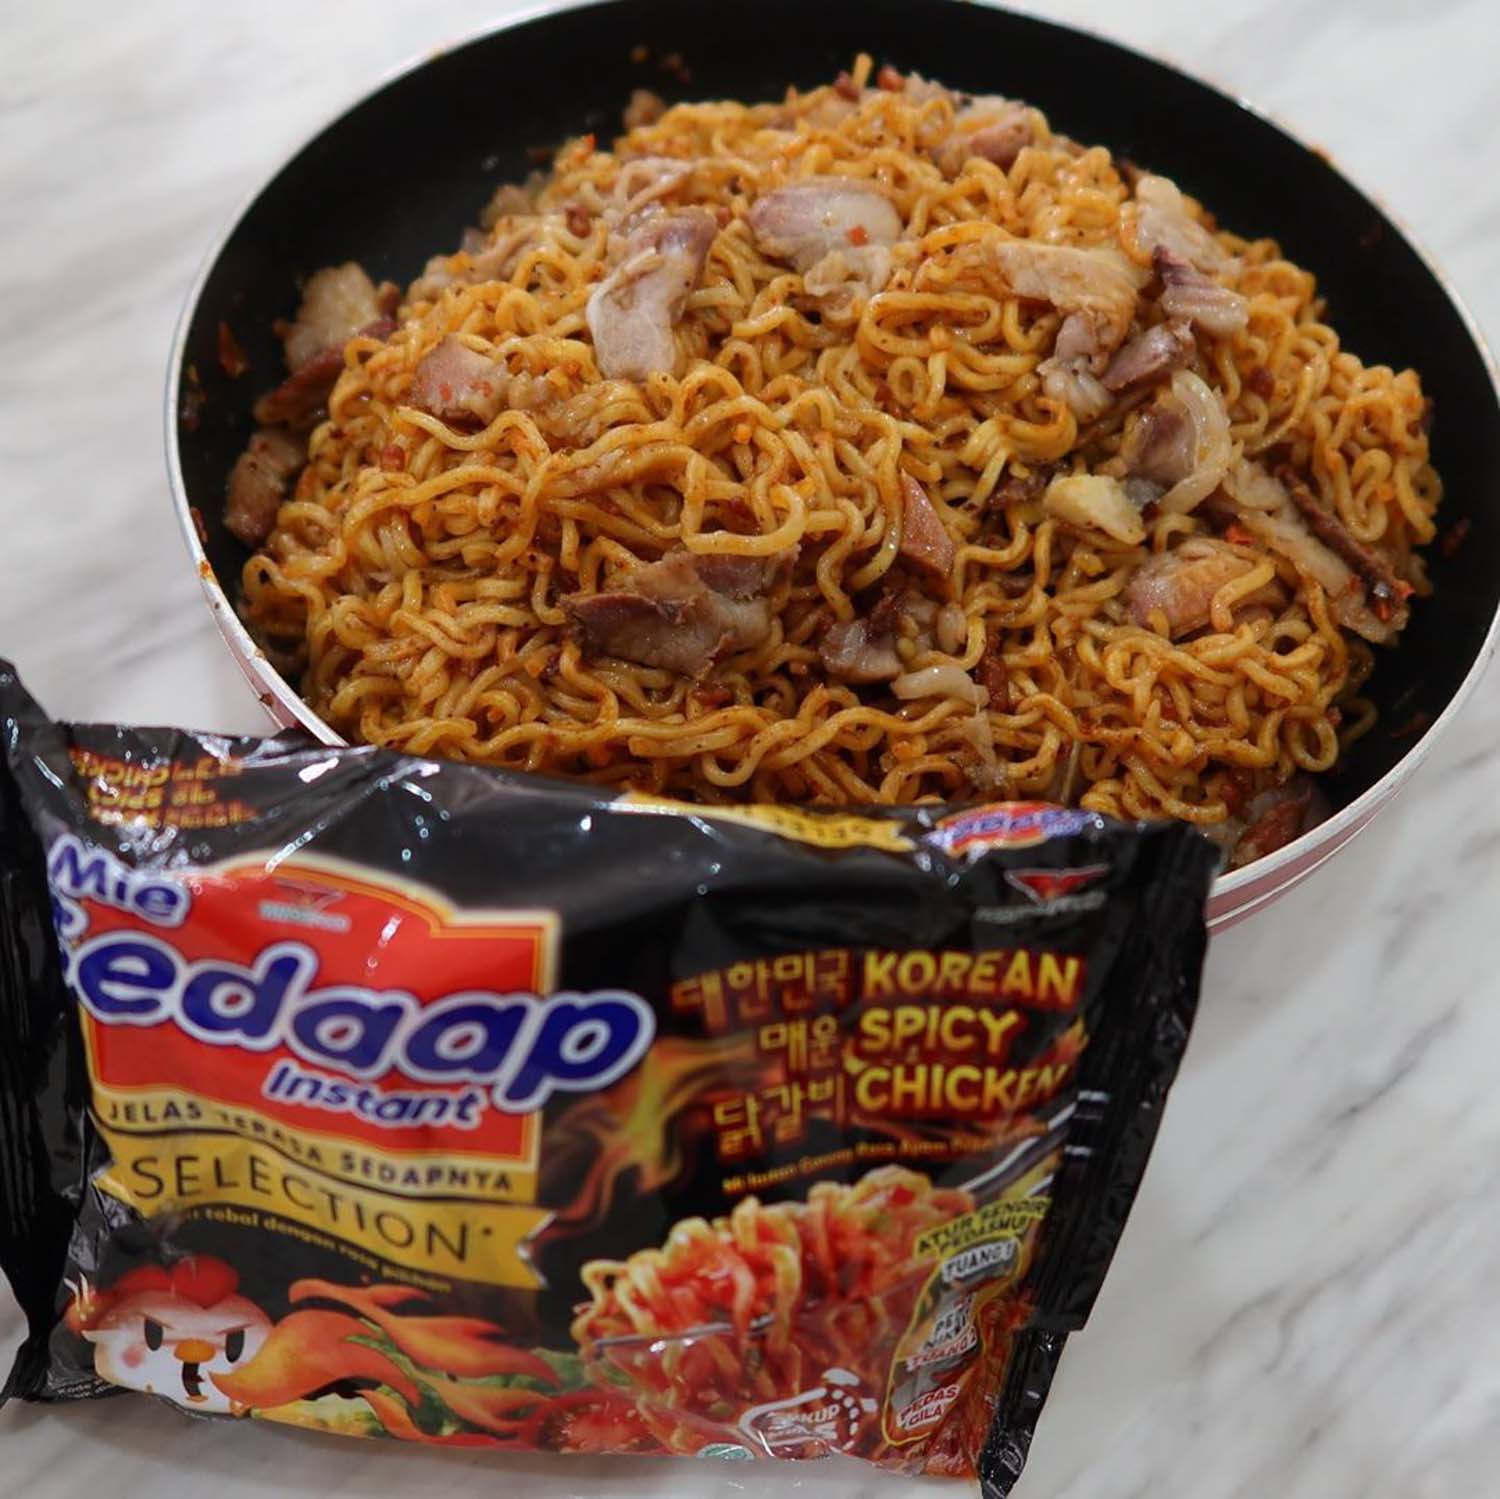 Mie Sedaap Has New Korean Spicy Chicken Flavoured Noodles For Instant Mee Goreng Lovers